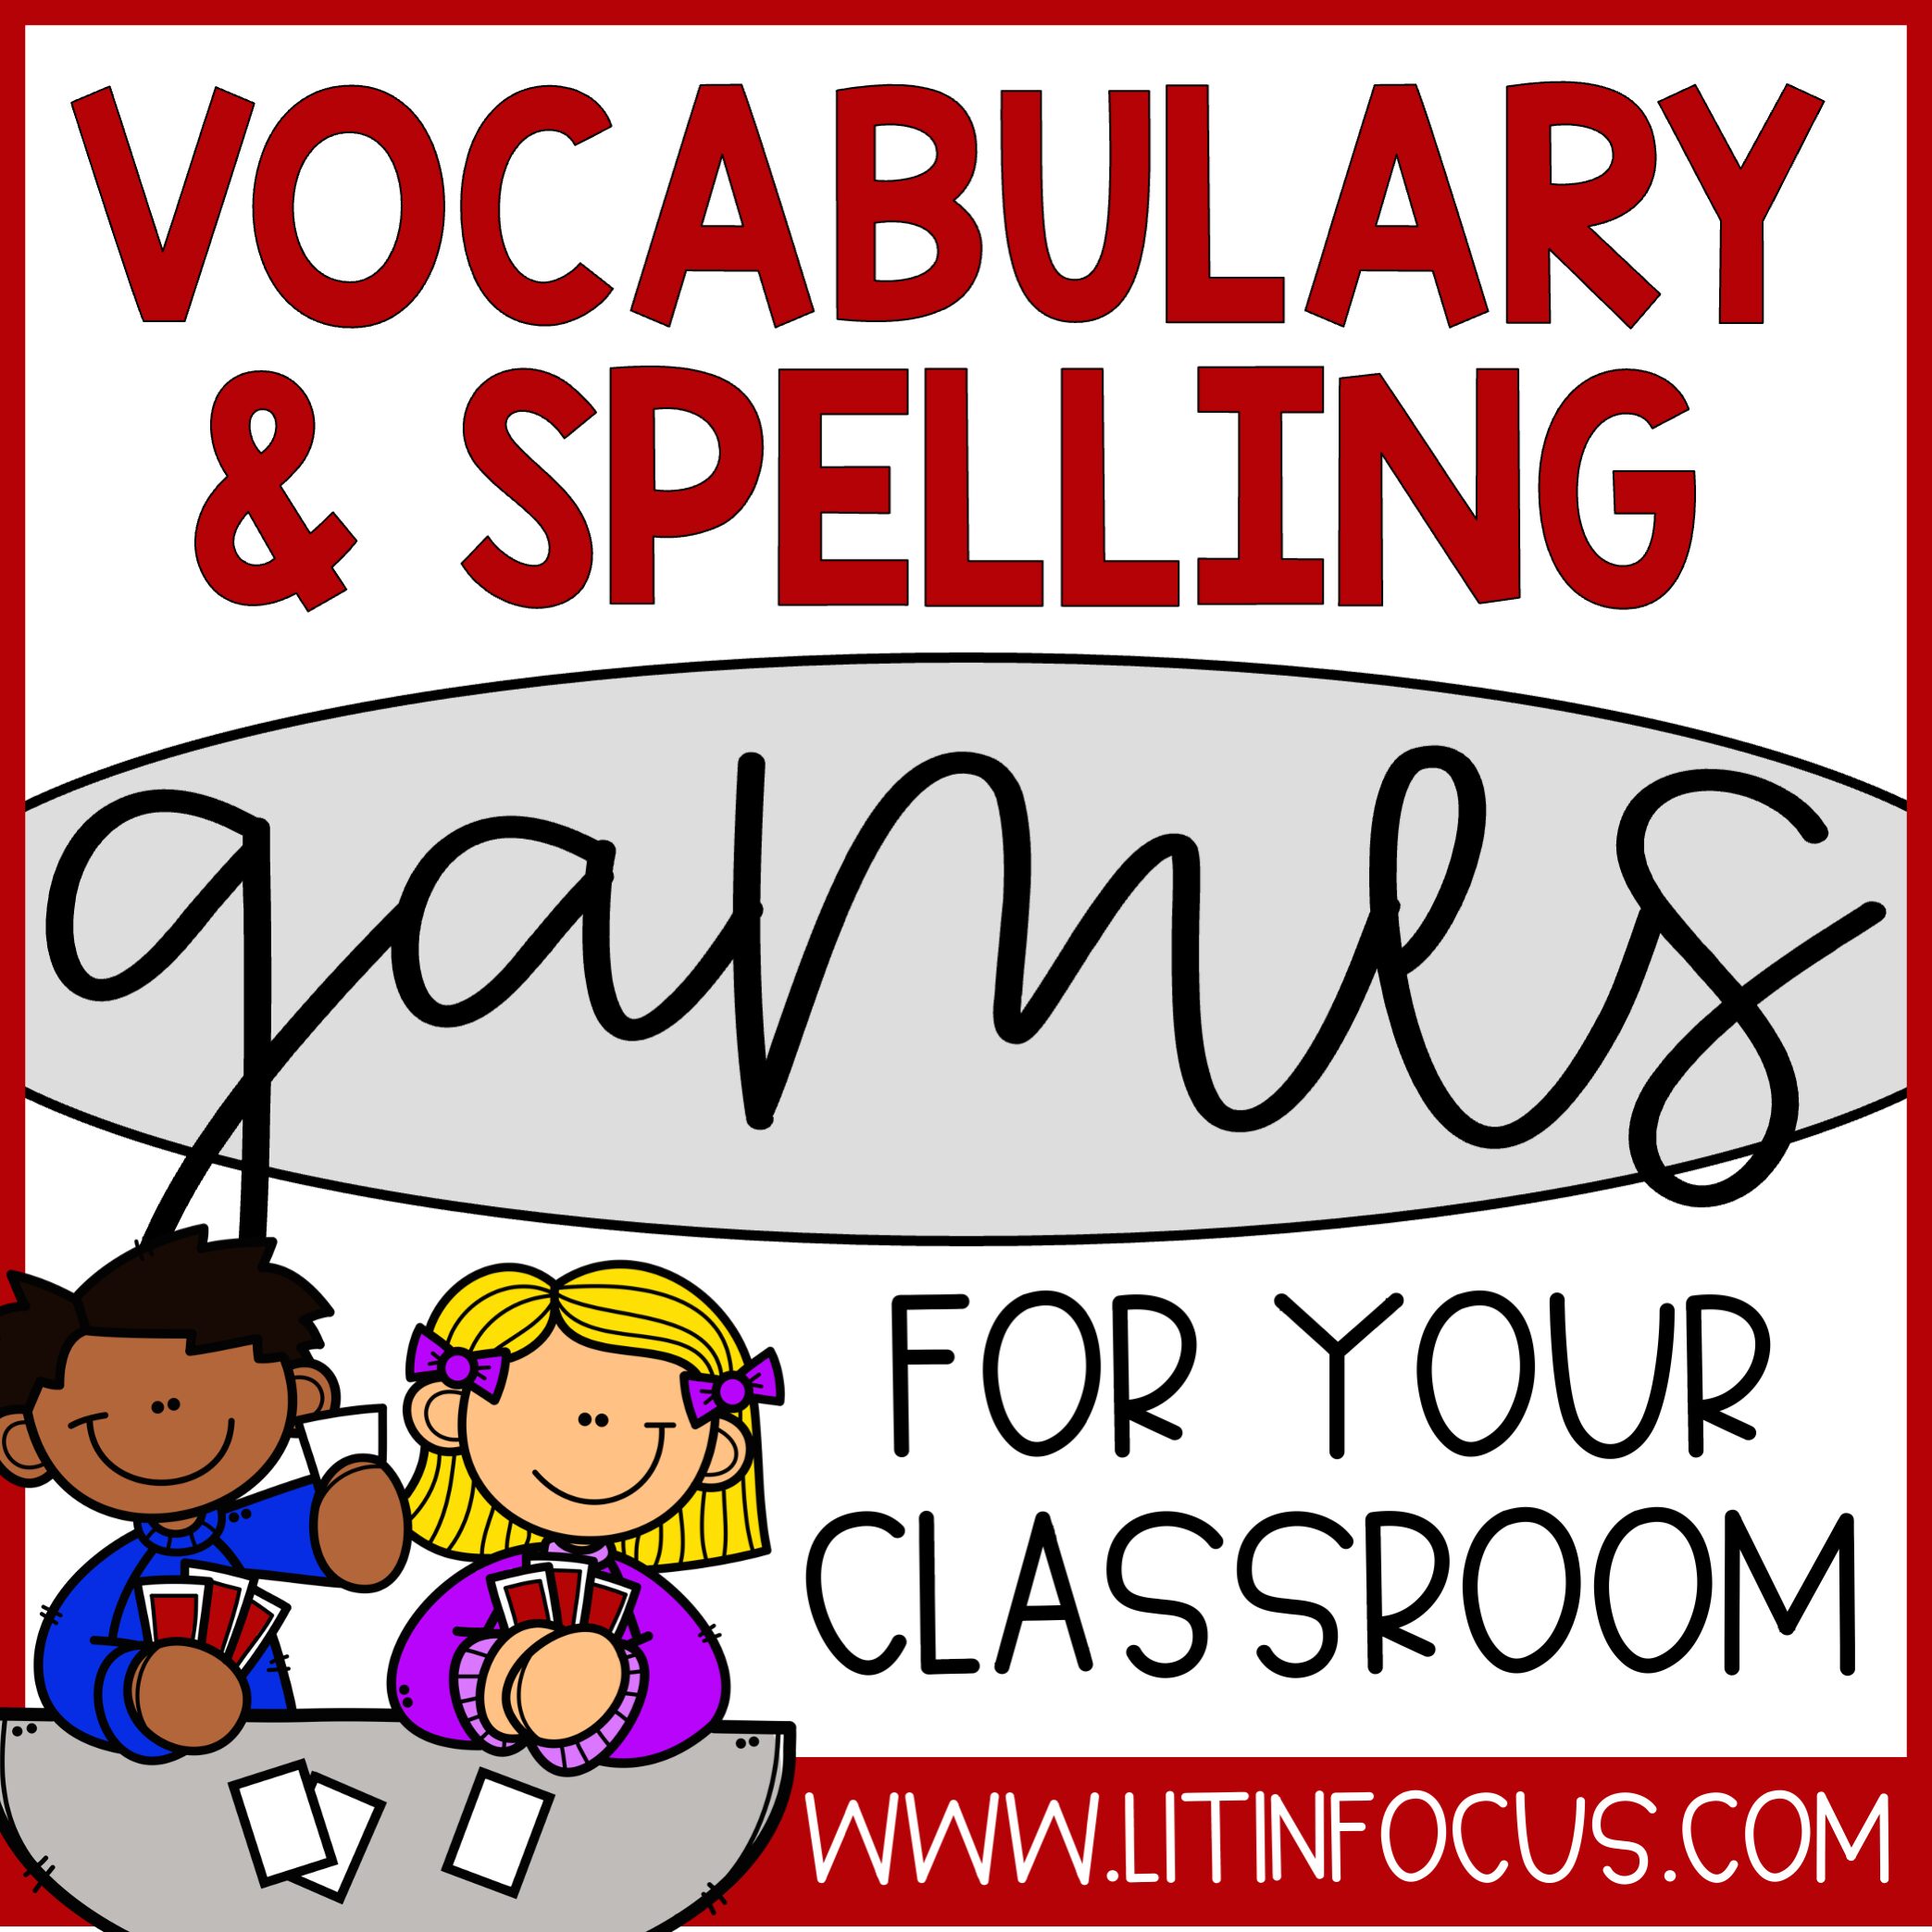 Vocabulary & Spelling Games for the Classroom